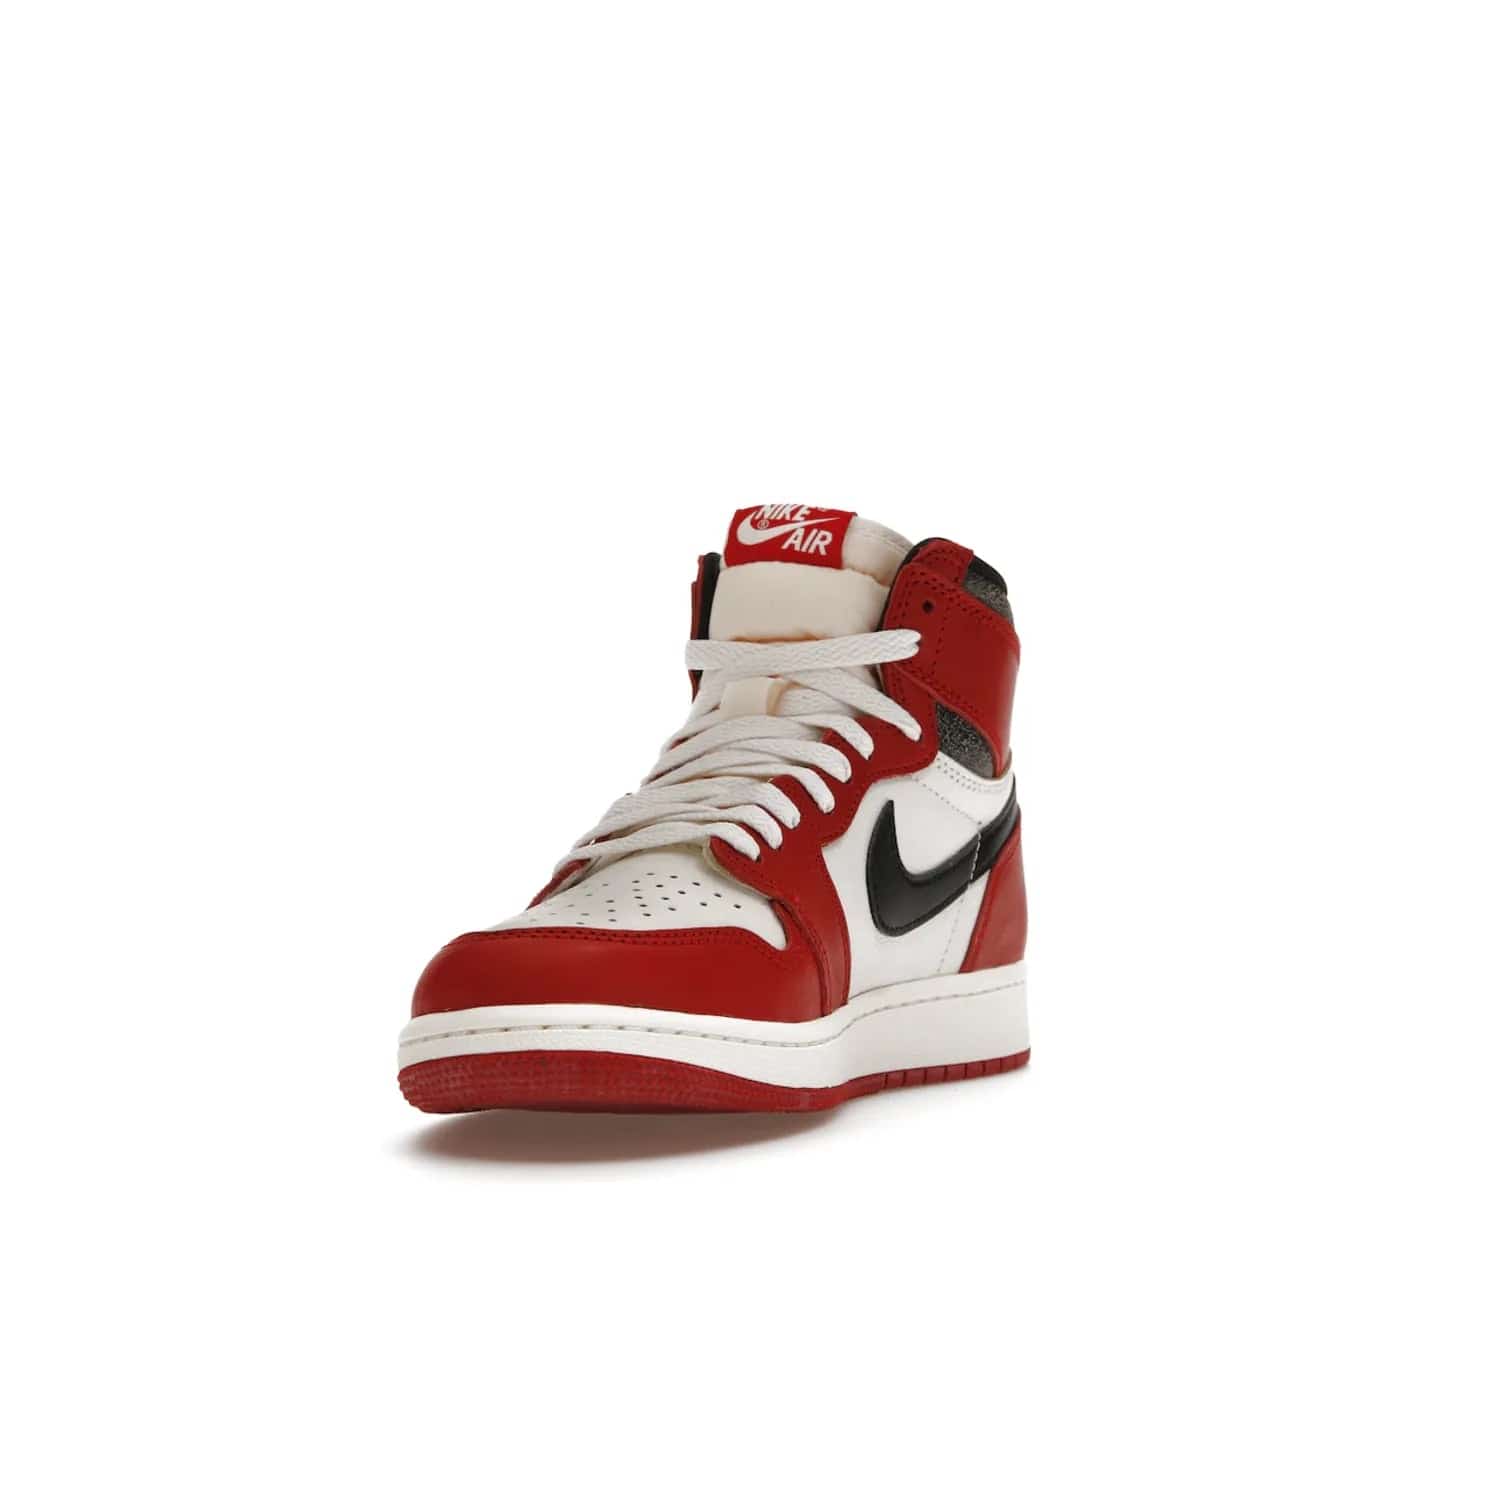 Jordan 1 Retro High OG Chicago Lost and Found (GS) - Image 13 - Only at www.BallersClubKickz.com - Grab the Air Jordan 1 Retro High OG Chicago Reimagined GS, presenting in classic 1985 silhouette. Varsity Red, Black, Muslin and Sail hues, featuring Nike Air branding, Wings on the collars and printed insoles. Don't miss out when it releases 19th Nov 2022.